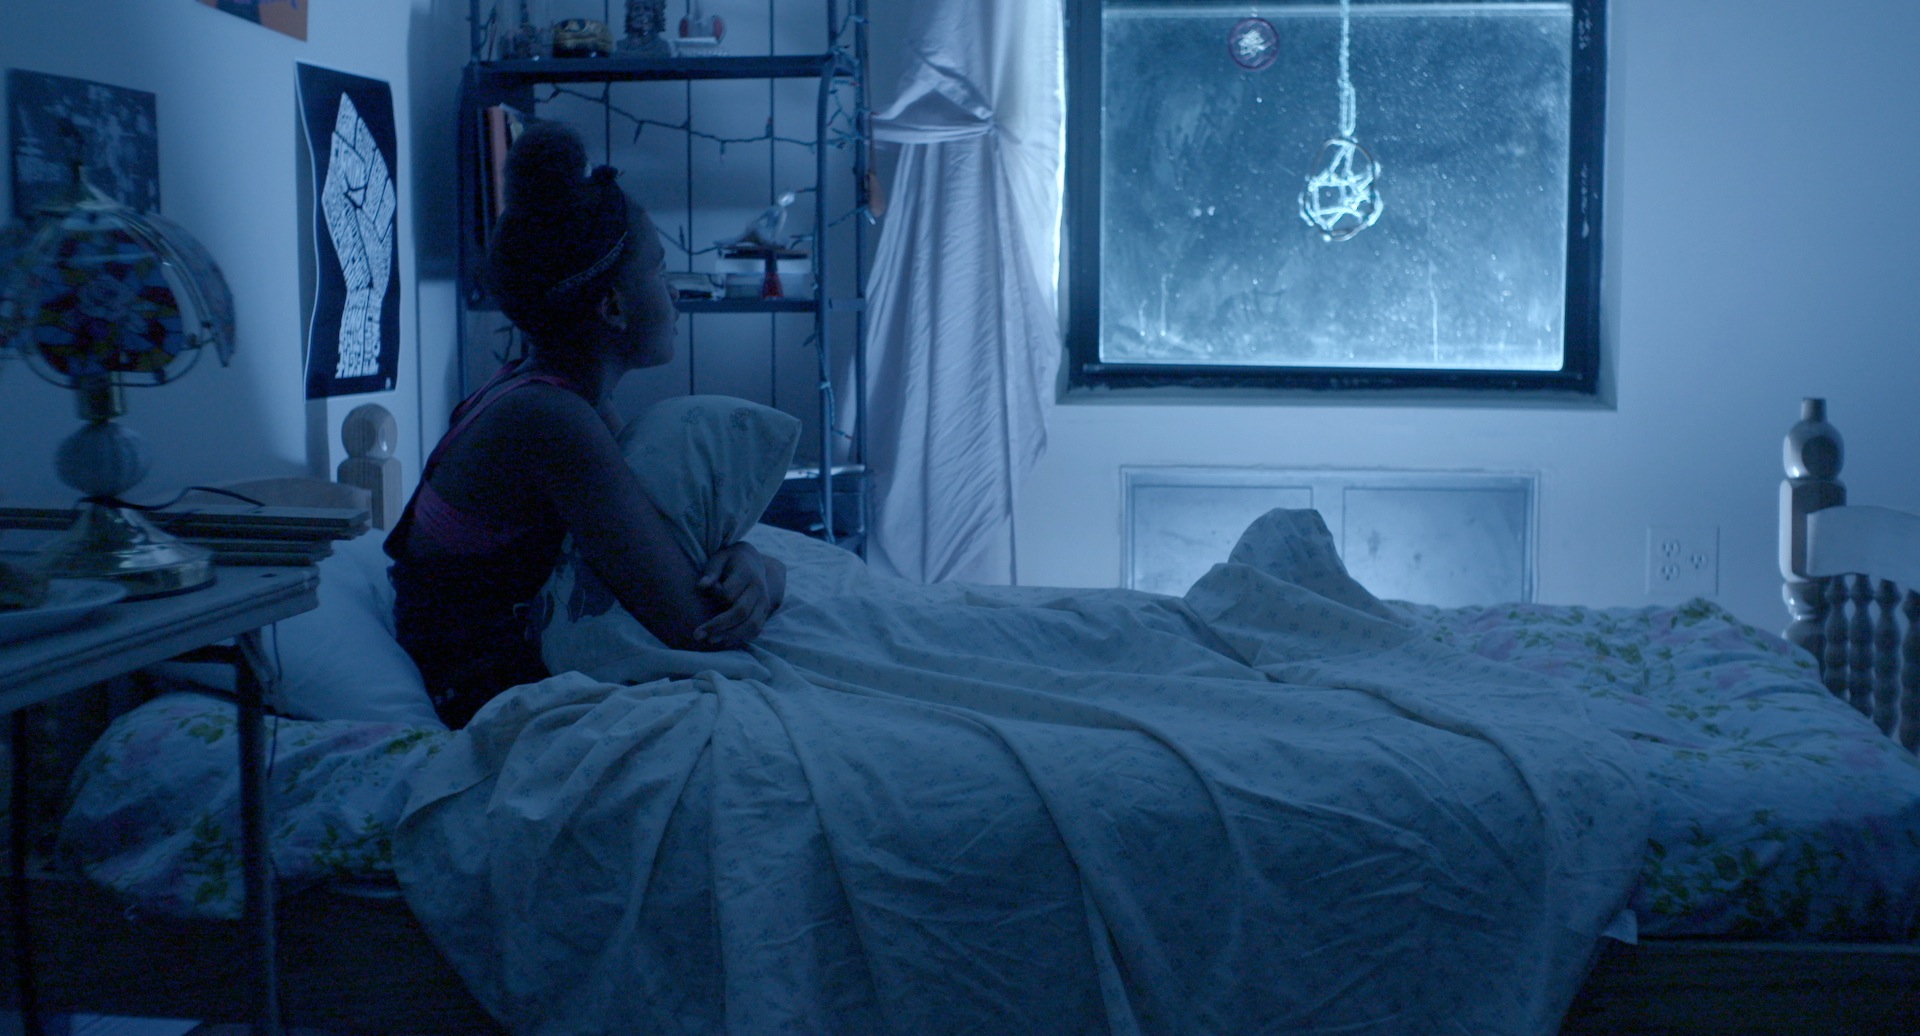  After Tilly's mom leaves the room, she turns off the lights and just the&nbsp;moonlight comes through. It shows Tilly coming back into the real world after checking out for a moment to reminisce with her mom.&nbsp;The dreamcatcher prop was featured 